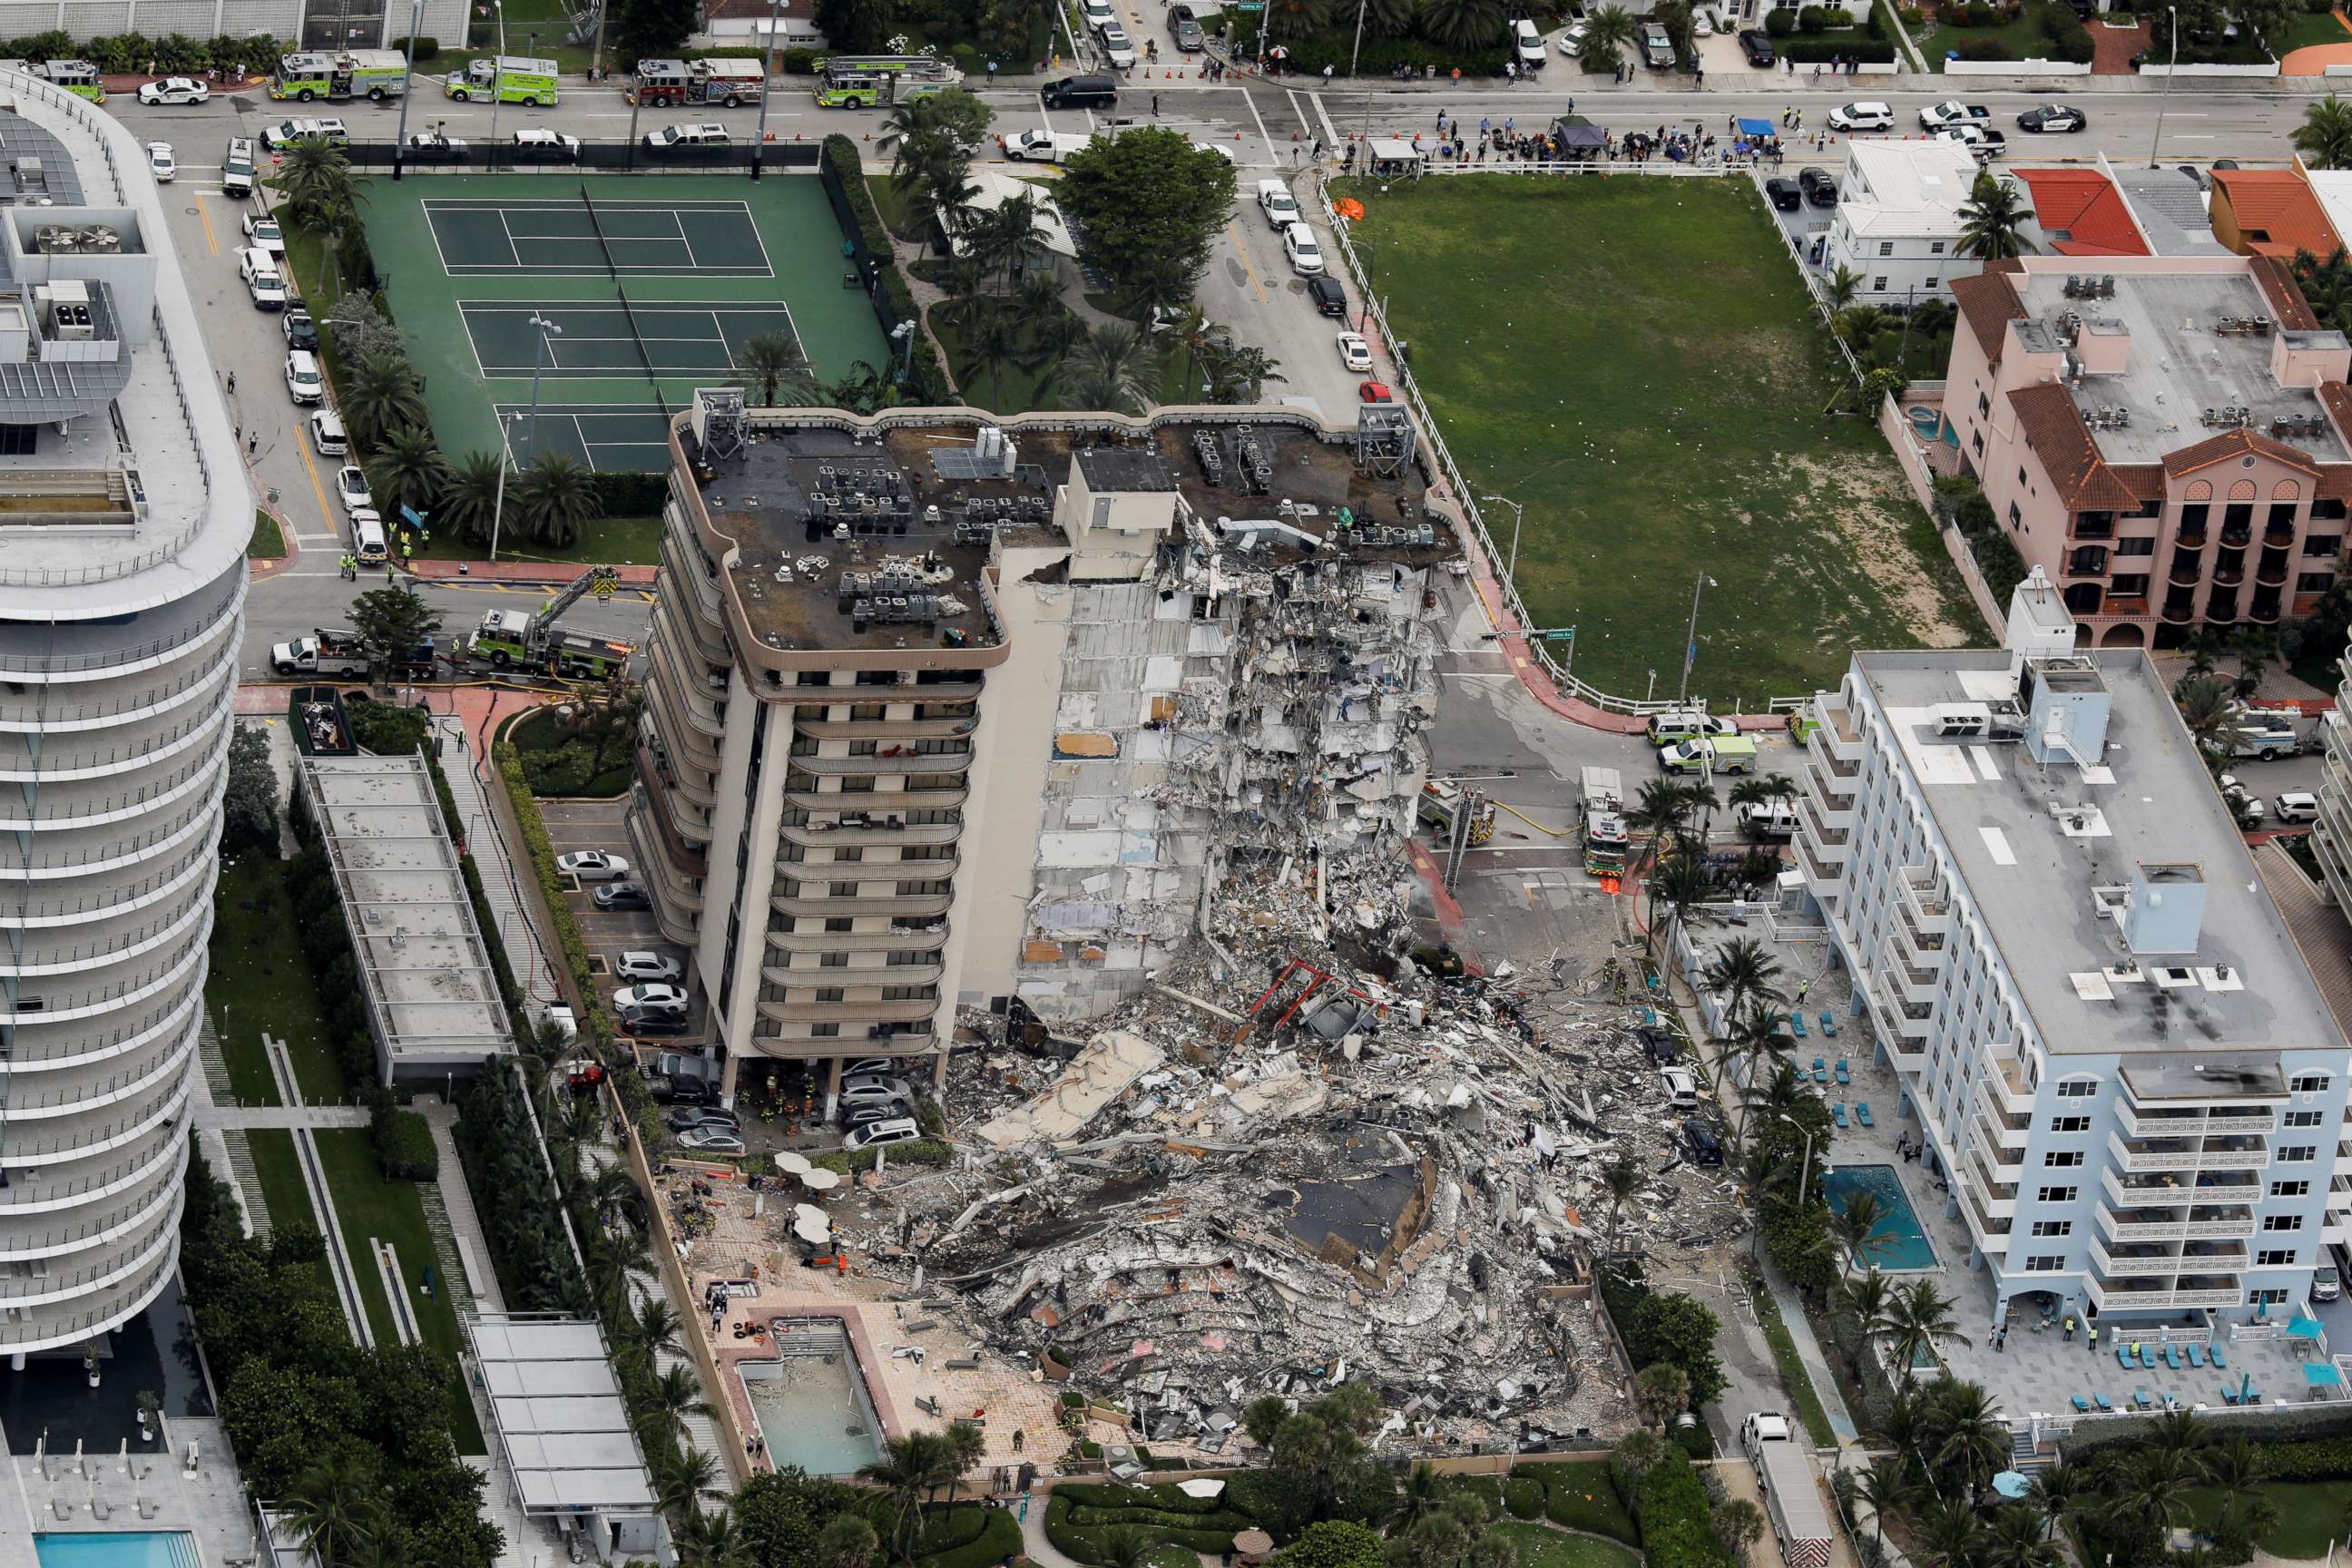 PHOTO: An aerial view showing a partially collapsed building in Surfside near Miami Beach, Fla., June 24, 2021.